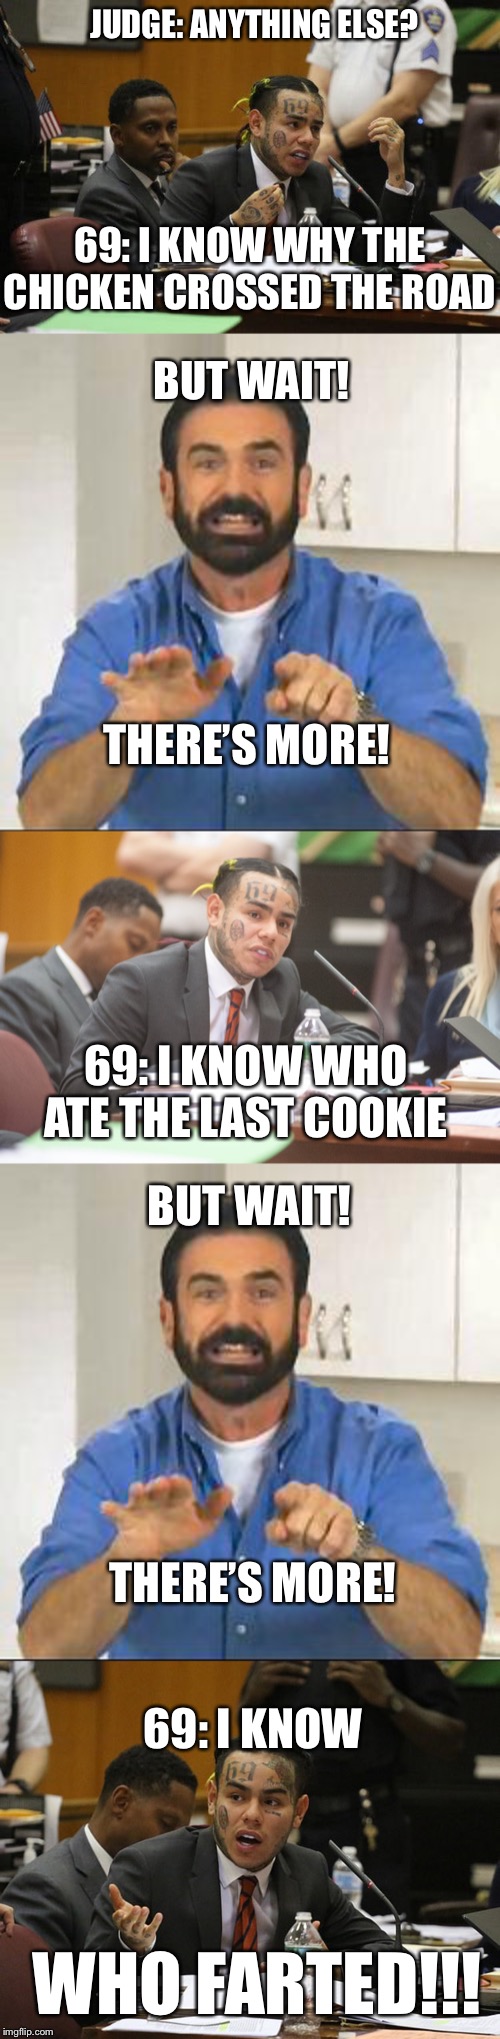 JUDGE: ANYTHING ELSE? 69: I KNOW WHY THE CHICKEN CROSSED THE ROAD; BUT WAIT! THERE’S MORE! 69: I KNOW WHO ATE THE LAST COOKIE; BUT WAIT! THERE’S MORE! 69: I KNOW; WHO FARTED!!! | image tagged in but wait there's more,tekashi 6ix9ine testifies,tekashi snitching,tekashi 69 | made w/ Imgflip meme maker